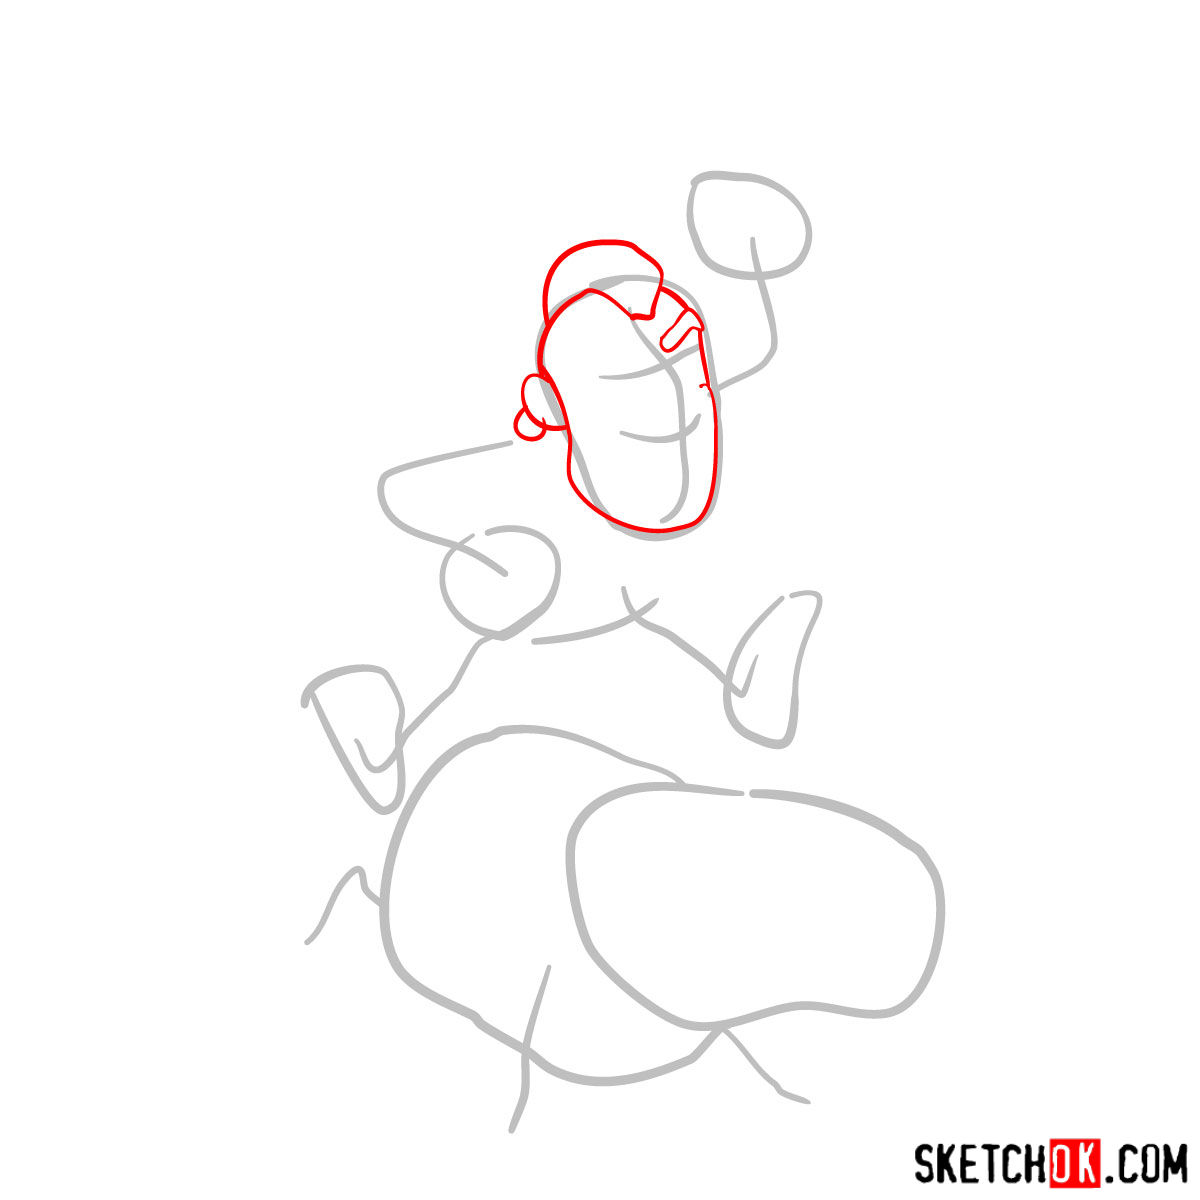 How to draw Hog Rider from Clash of Clans - step 02